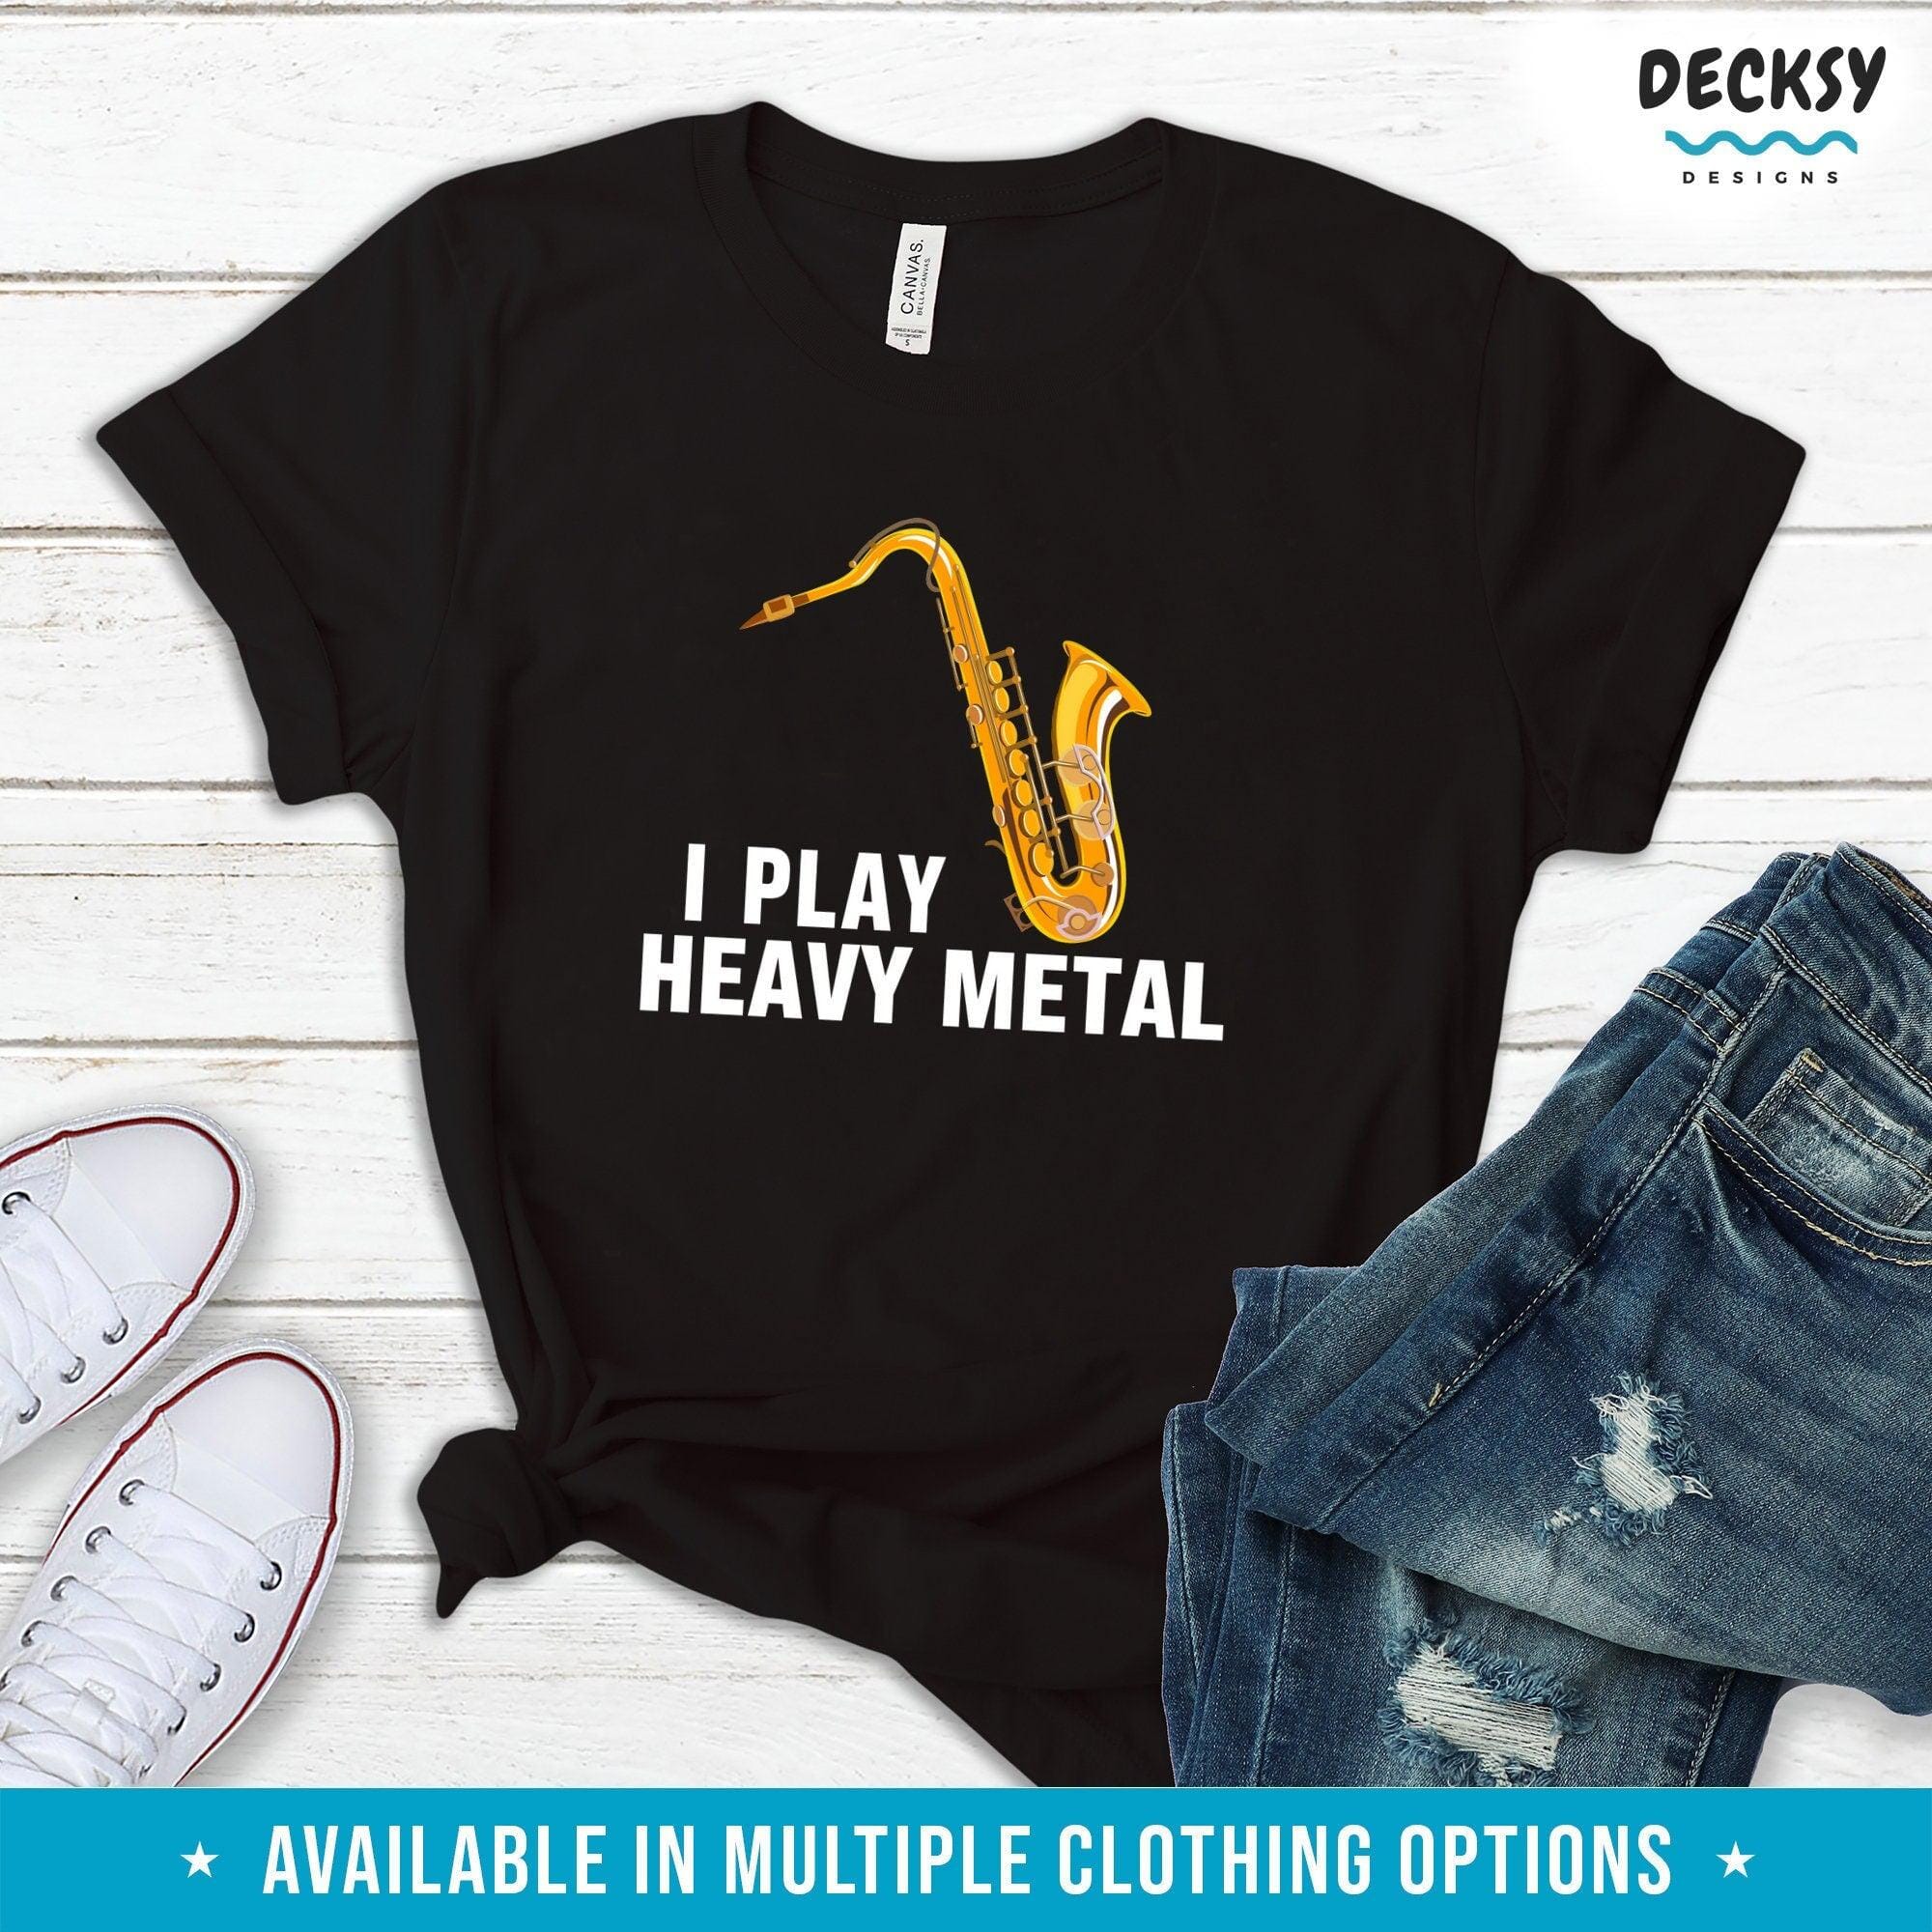 Saxophone Shirt, Sax Musician Gift, Jazz Musician Tee-Clothing:Gender-Neutral Adult Clothing:Tops & Tees:T-shirts:Graphic Tees-DecksyDesigns